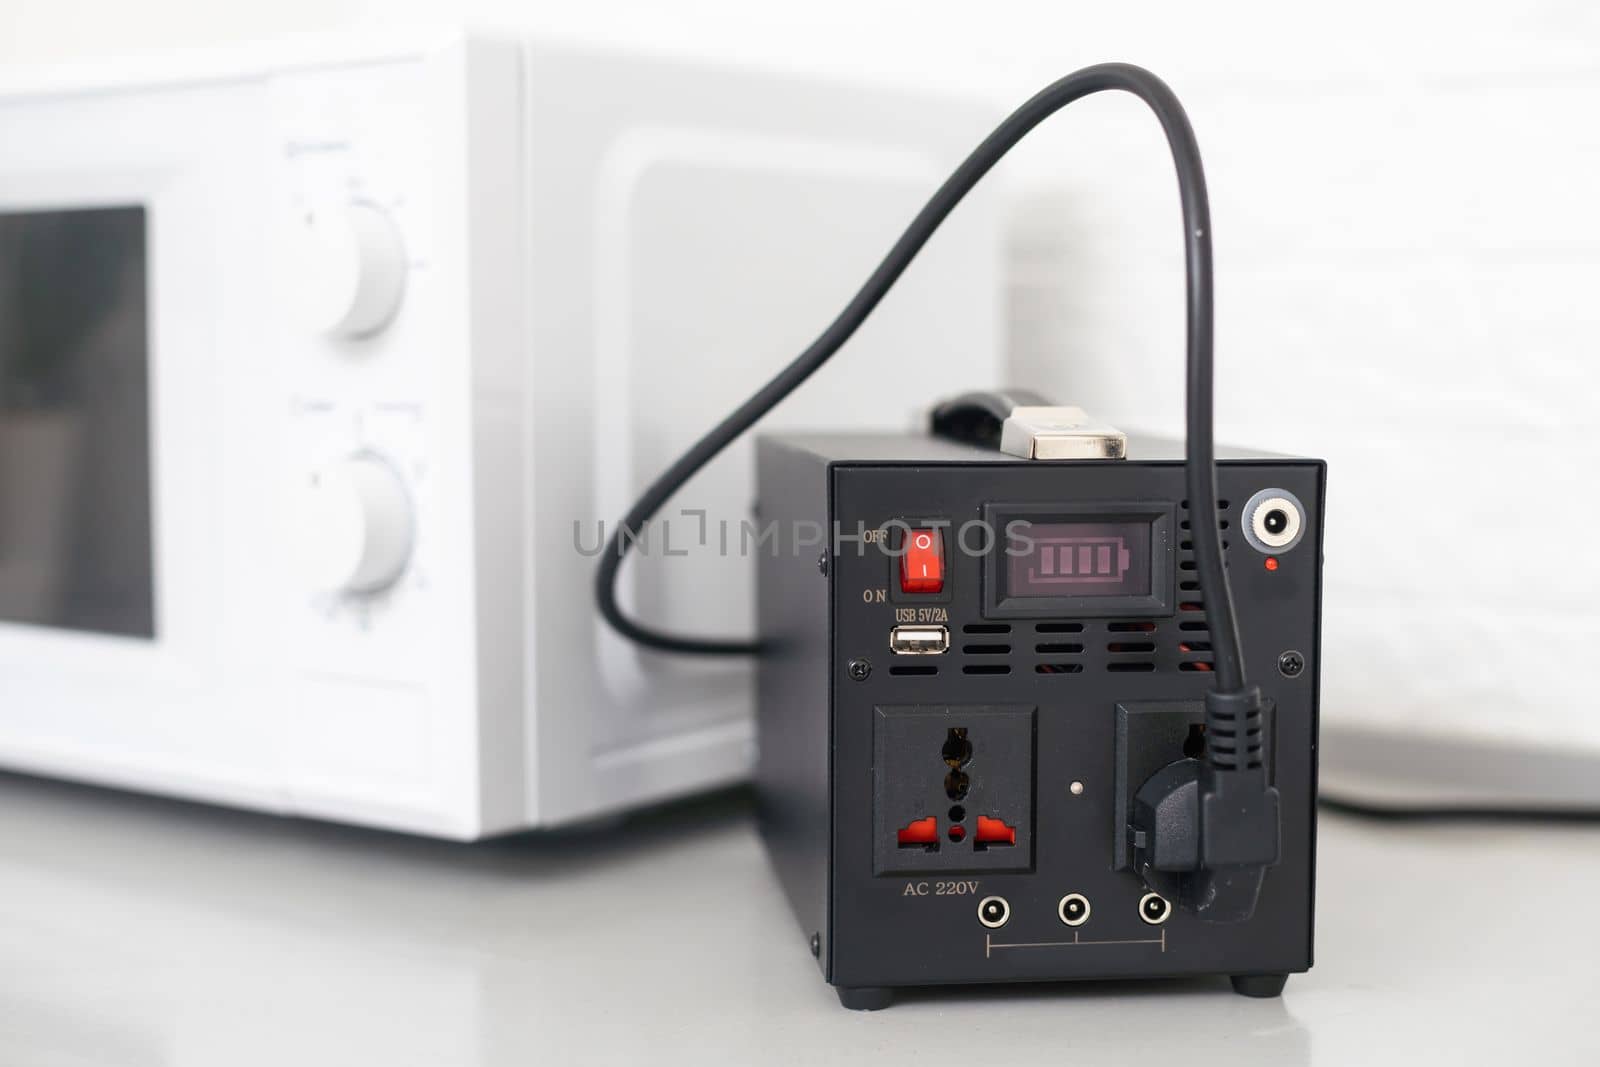 lithium Portable Power Station for home using when no electricity. Power bank by Andelov13